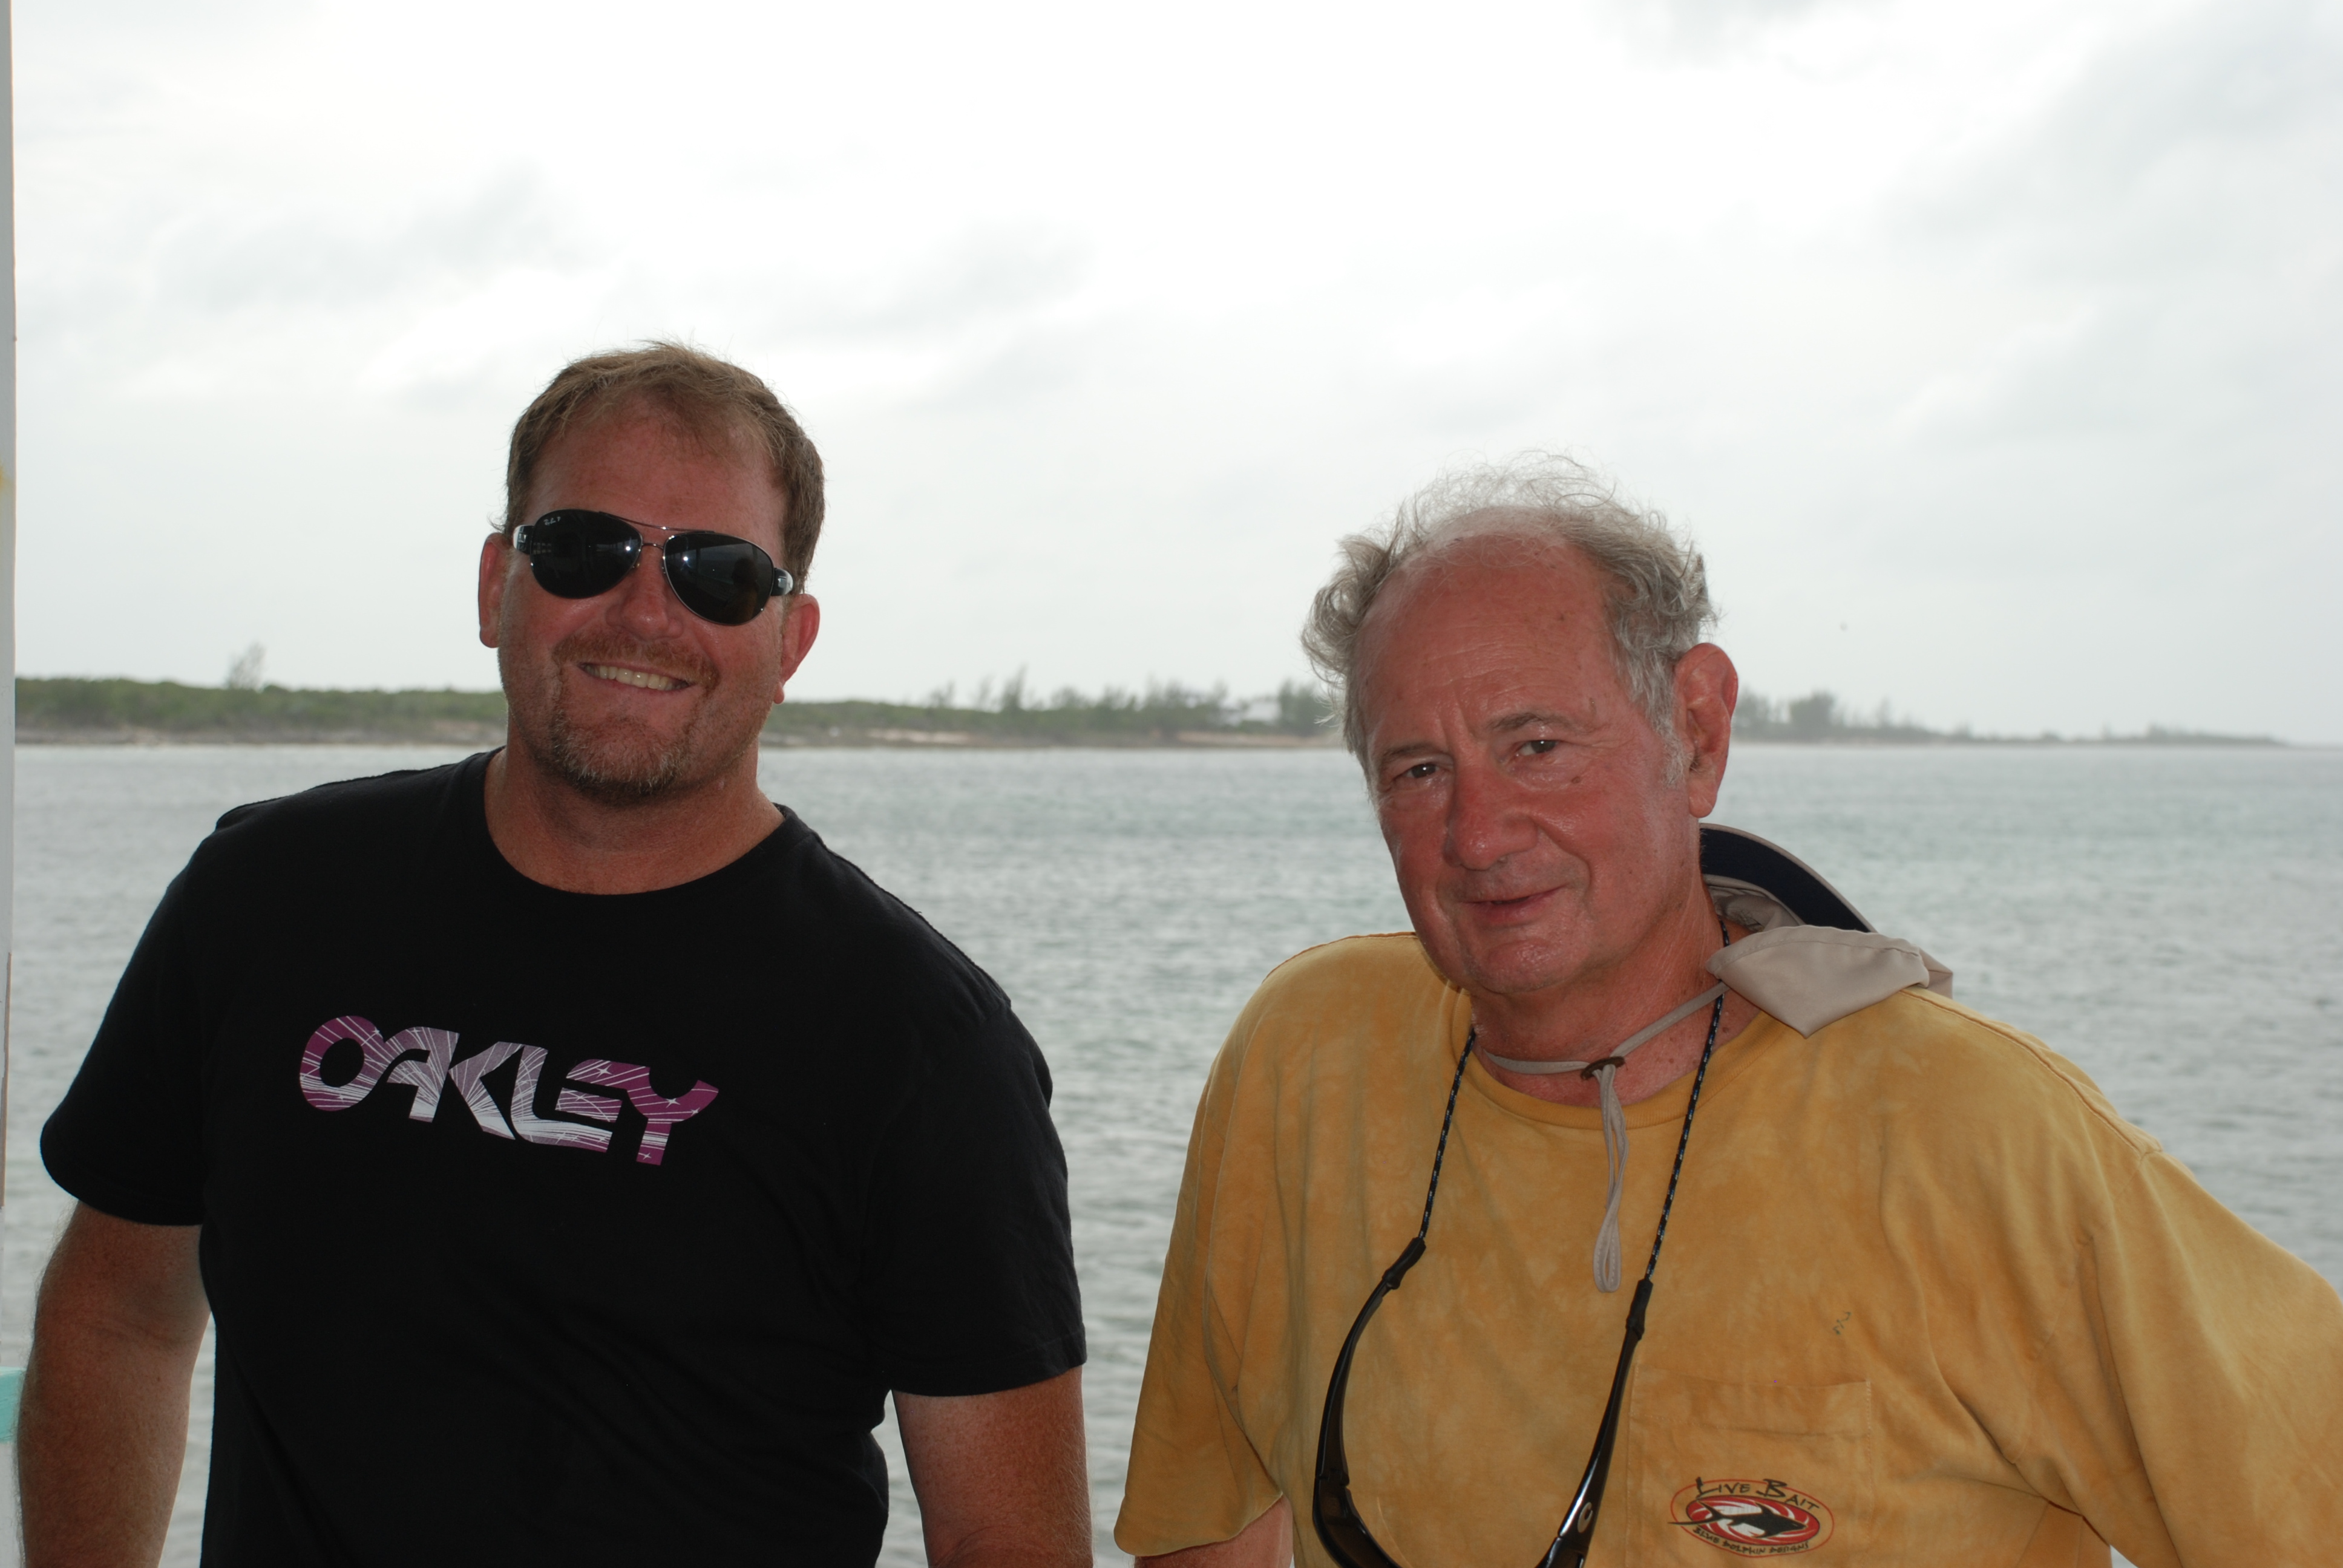 Walkers Cay Bahamas with Joe Wolfe my mentor, Legendary Fisherman, Yachtsman and Diver from Florida SEALS and Dads Highschool pal